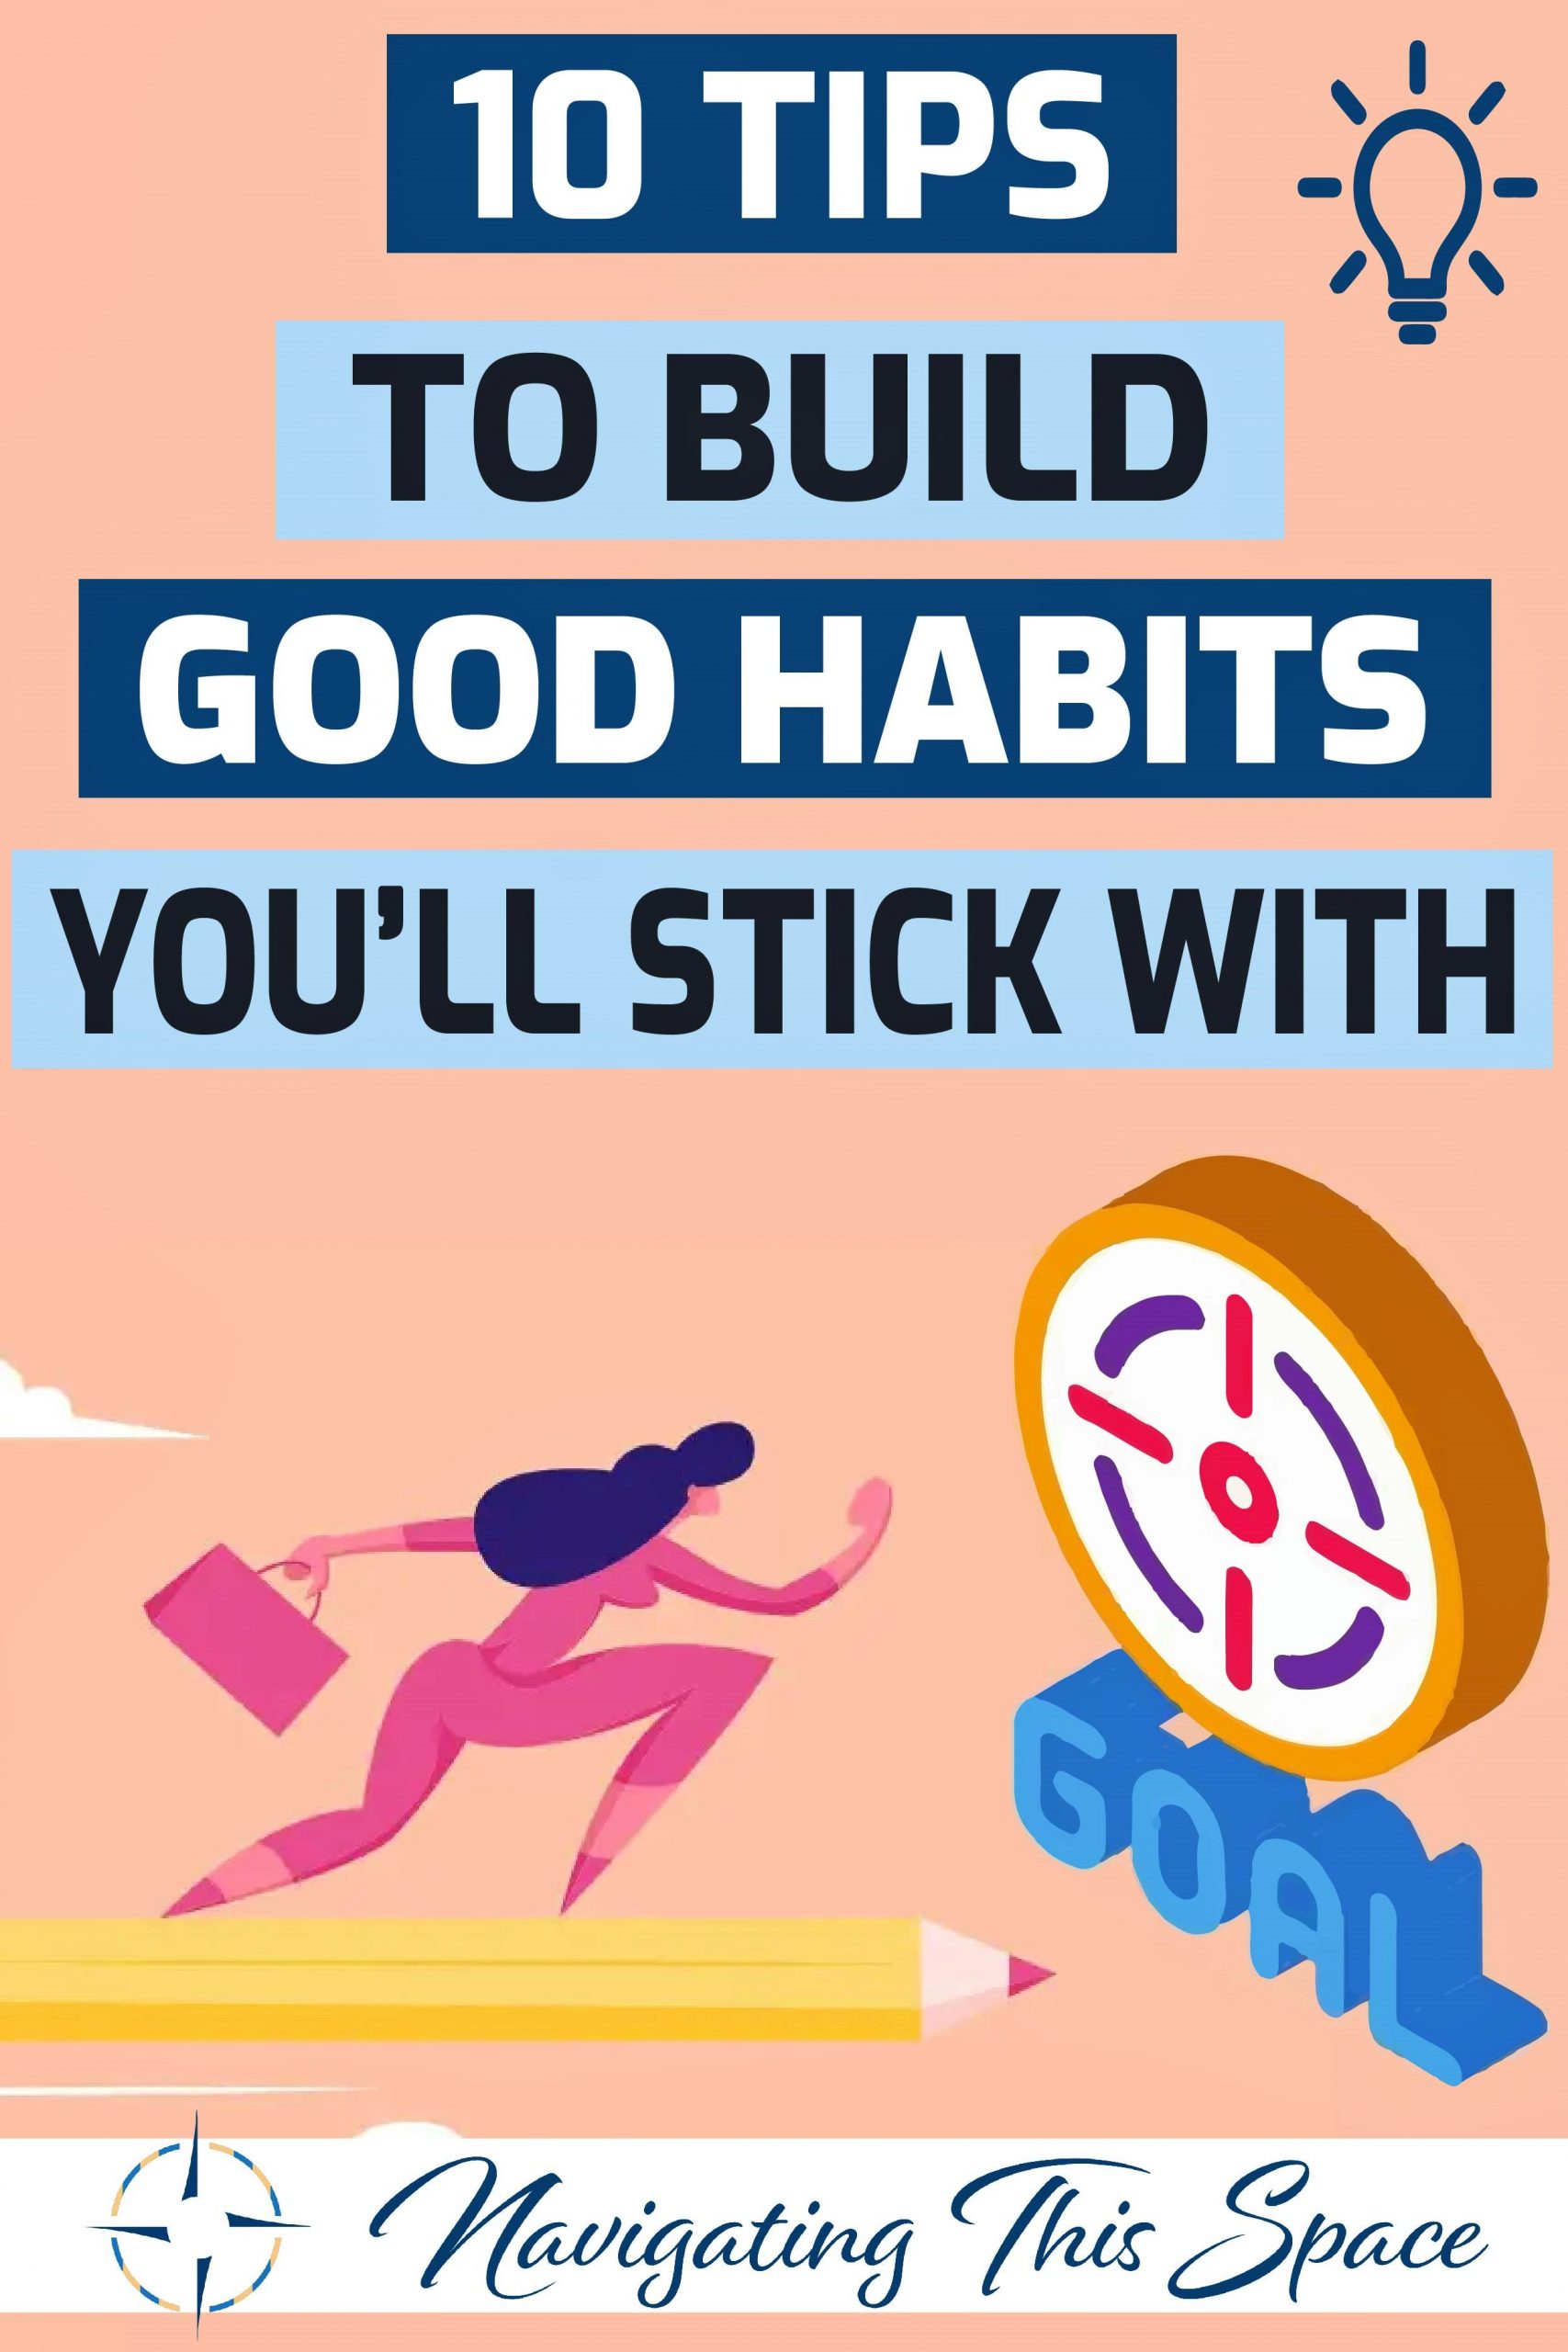 10 Tips to build good habits